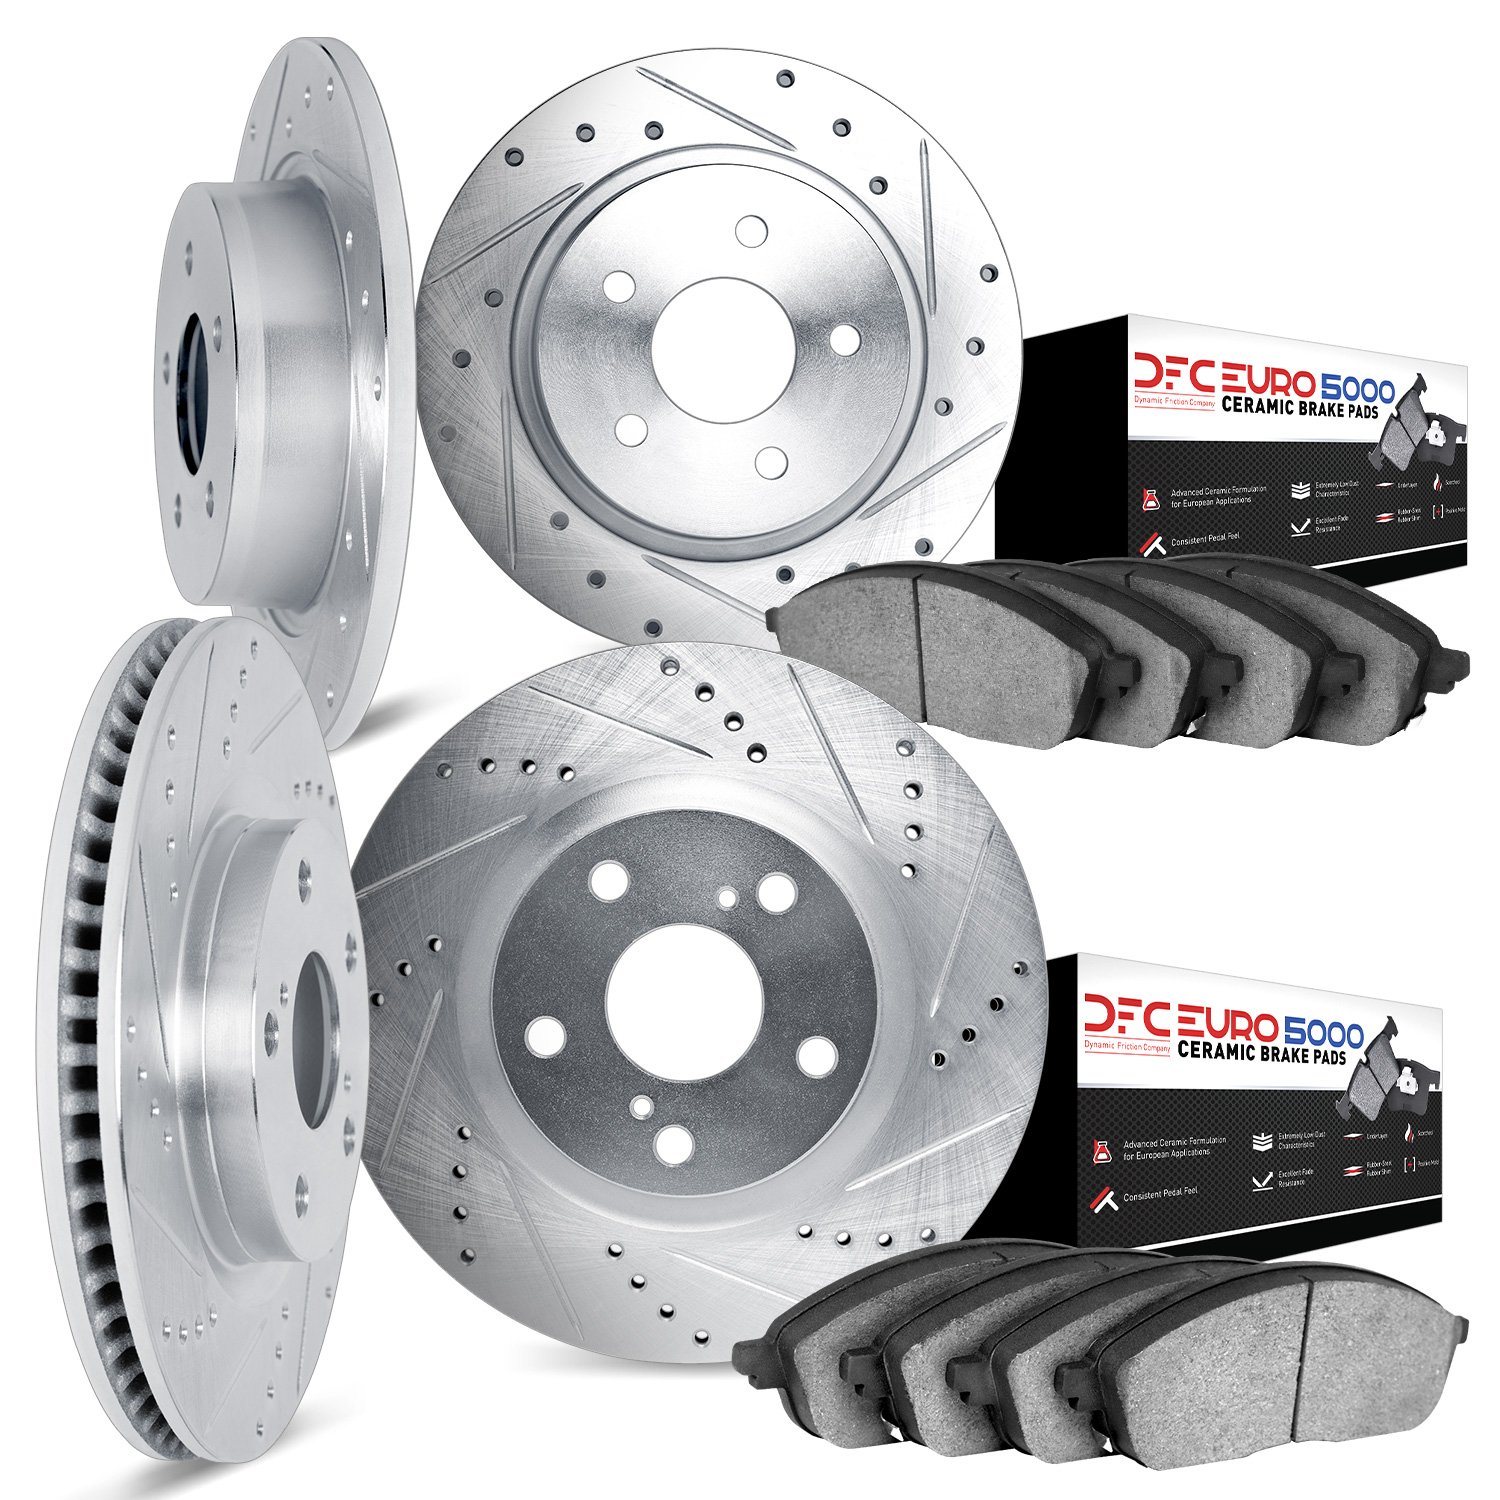 7604-31000 Drilled/Slotted Brake Rotors w/5000 Euro Ceramic Brake Pads Kit [Silver], 1981-1982 BMW, Position: Front and Rear